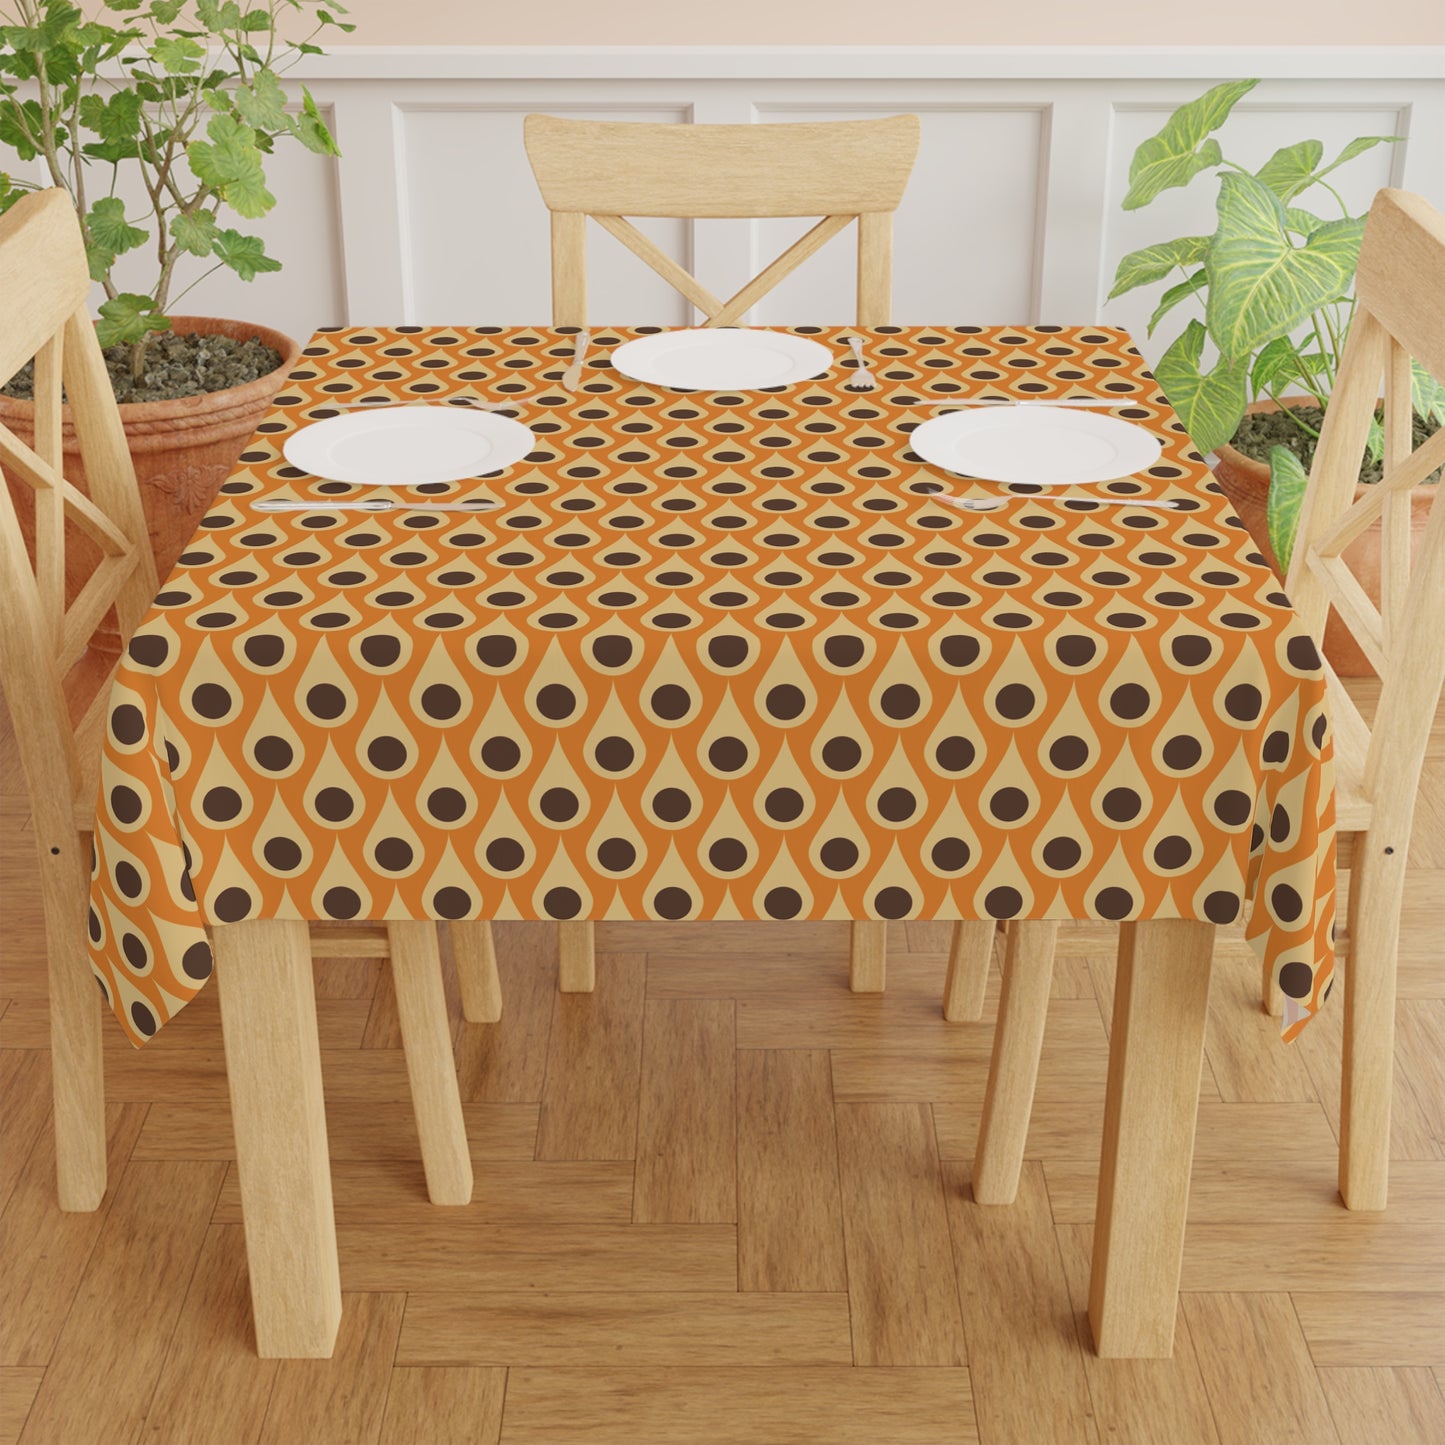 Retro 60s 70s Mid Century Mod Funky Mustard, Orange and Brown Tablecloth